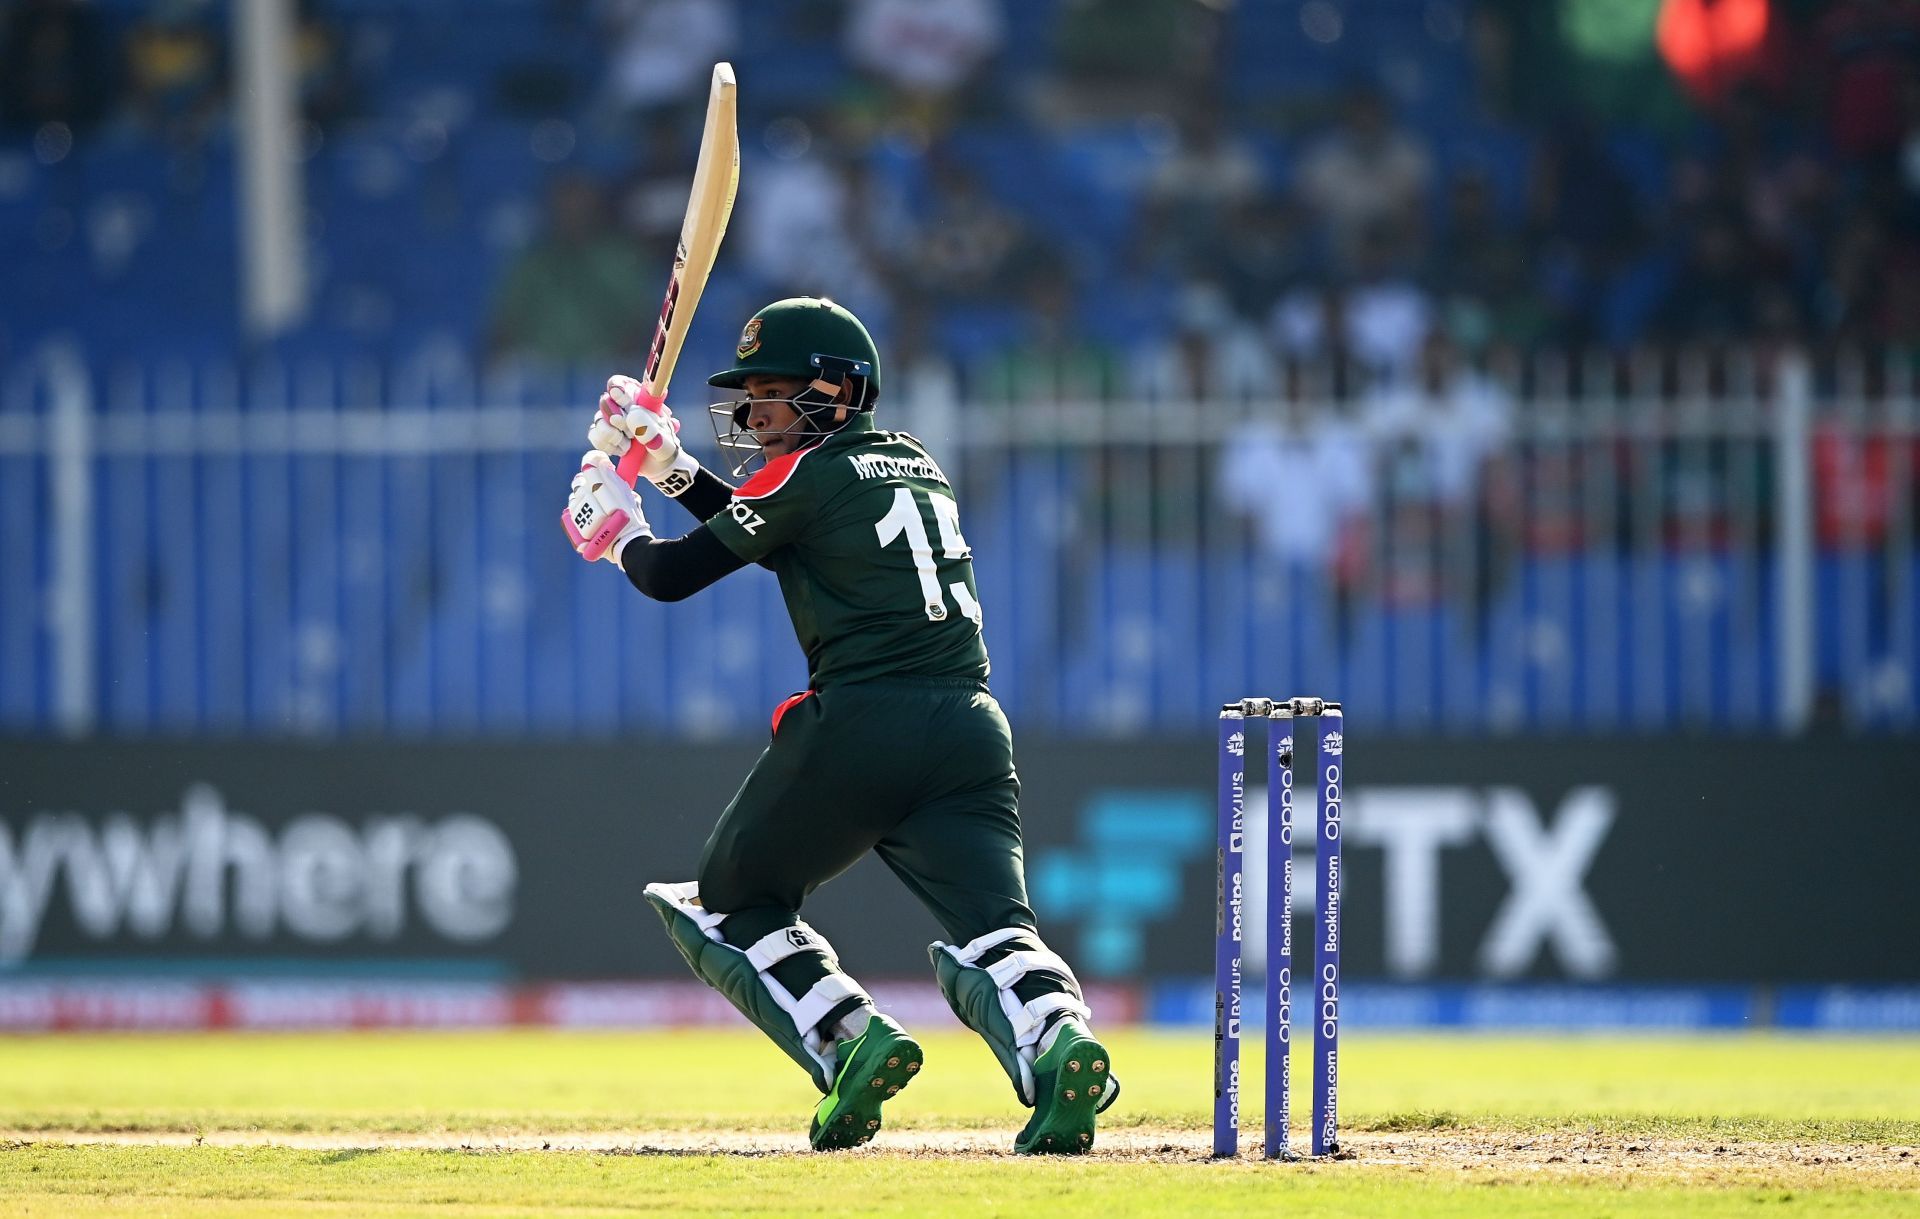 Mushfiqur Rahim will be keen to continue his good form in the England vs. Bangladesh T20 World Cup 2021 match